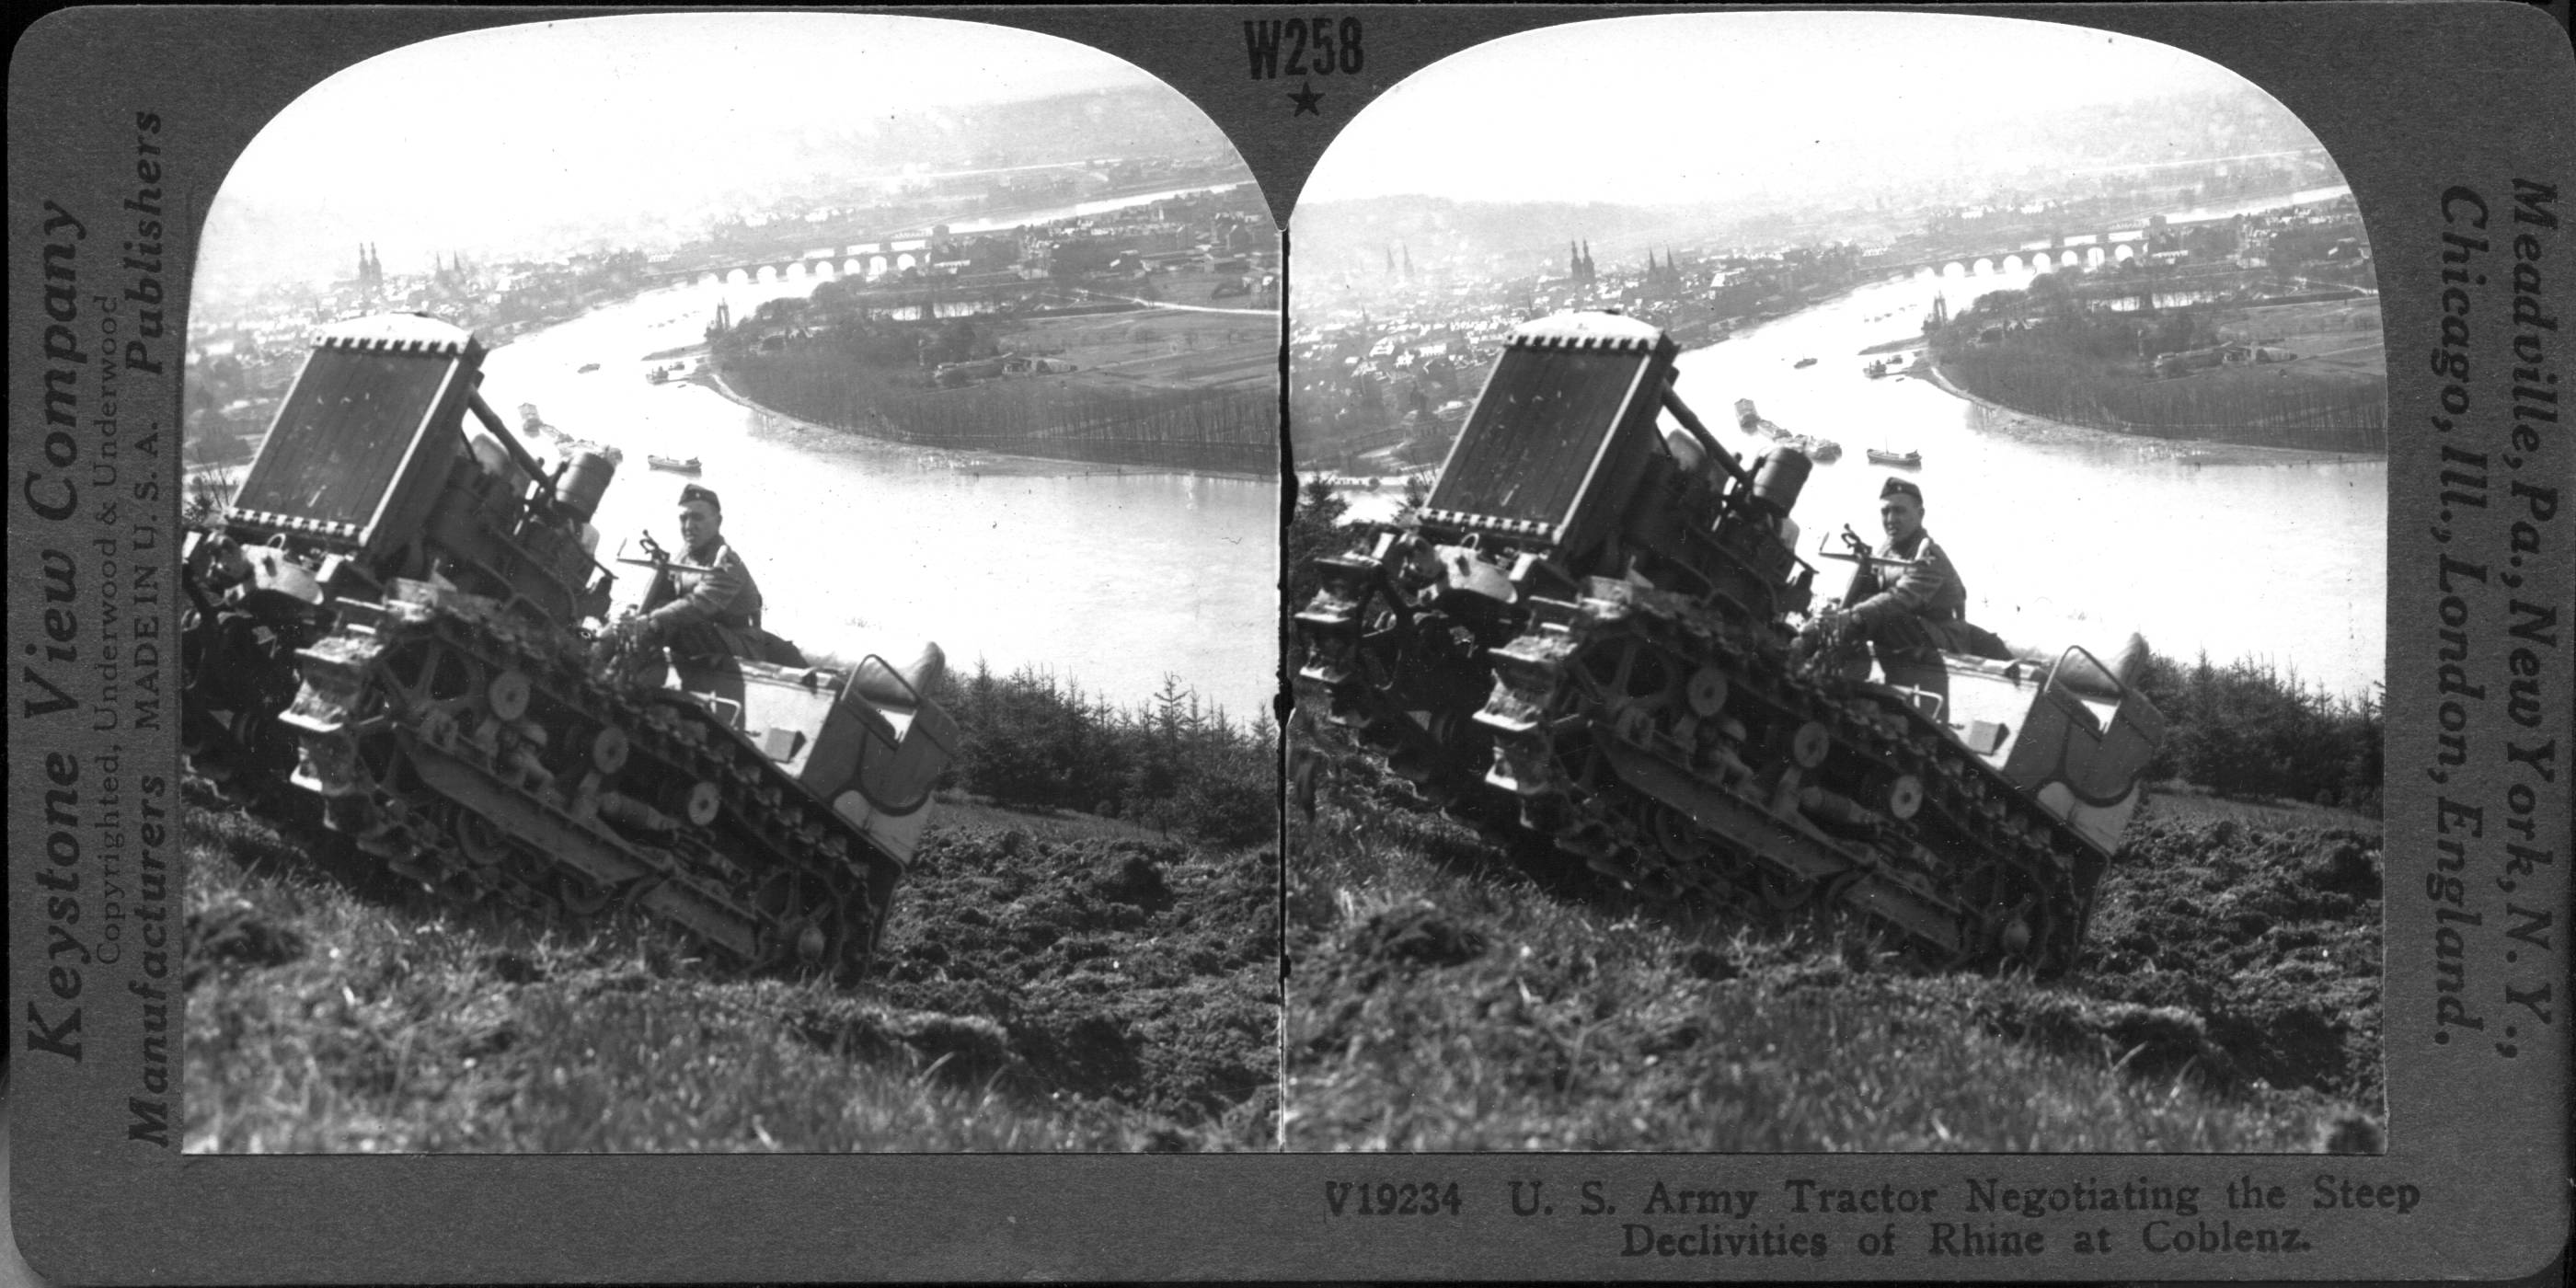 U.S. Army Tractor Negotiating the Steep Declivities of Rhine at Coblenz